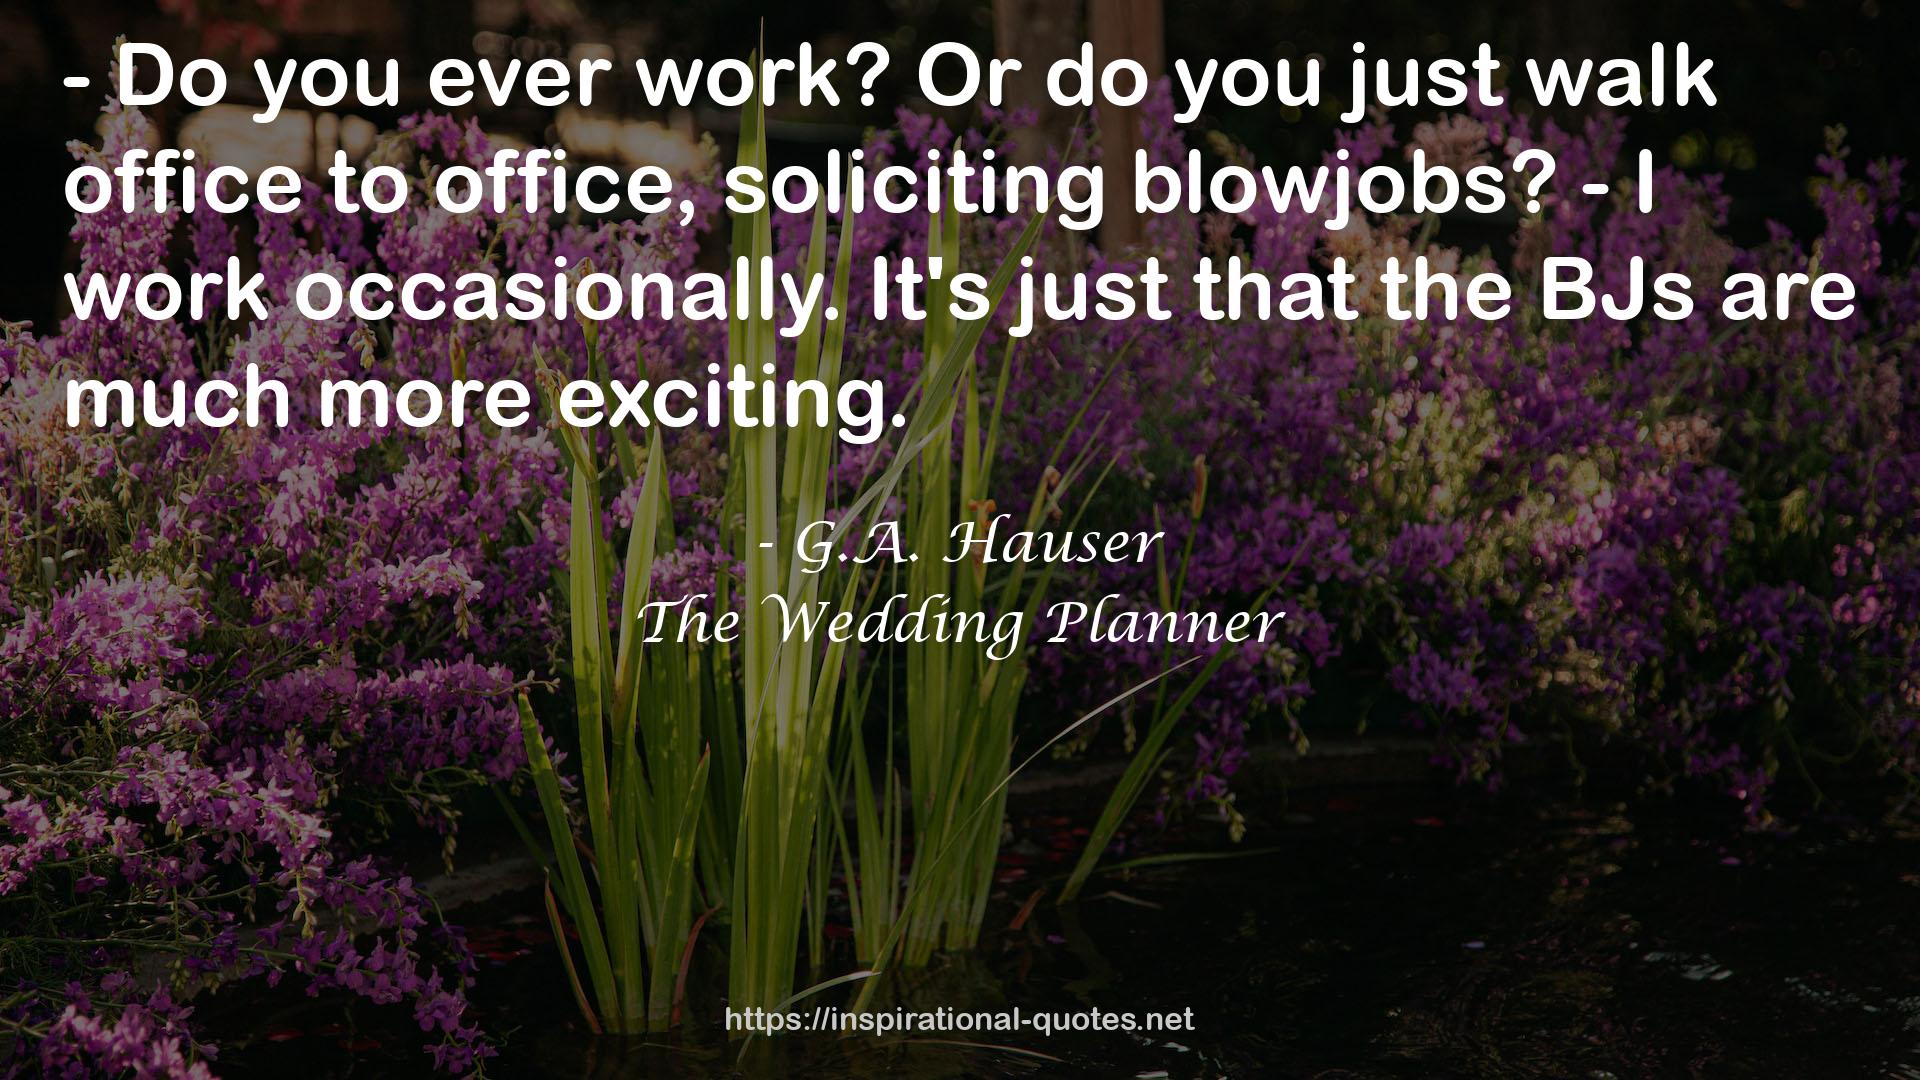 G.A. Hauser QUOTES